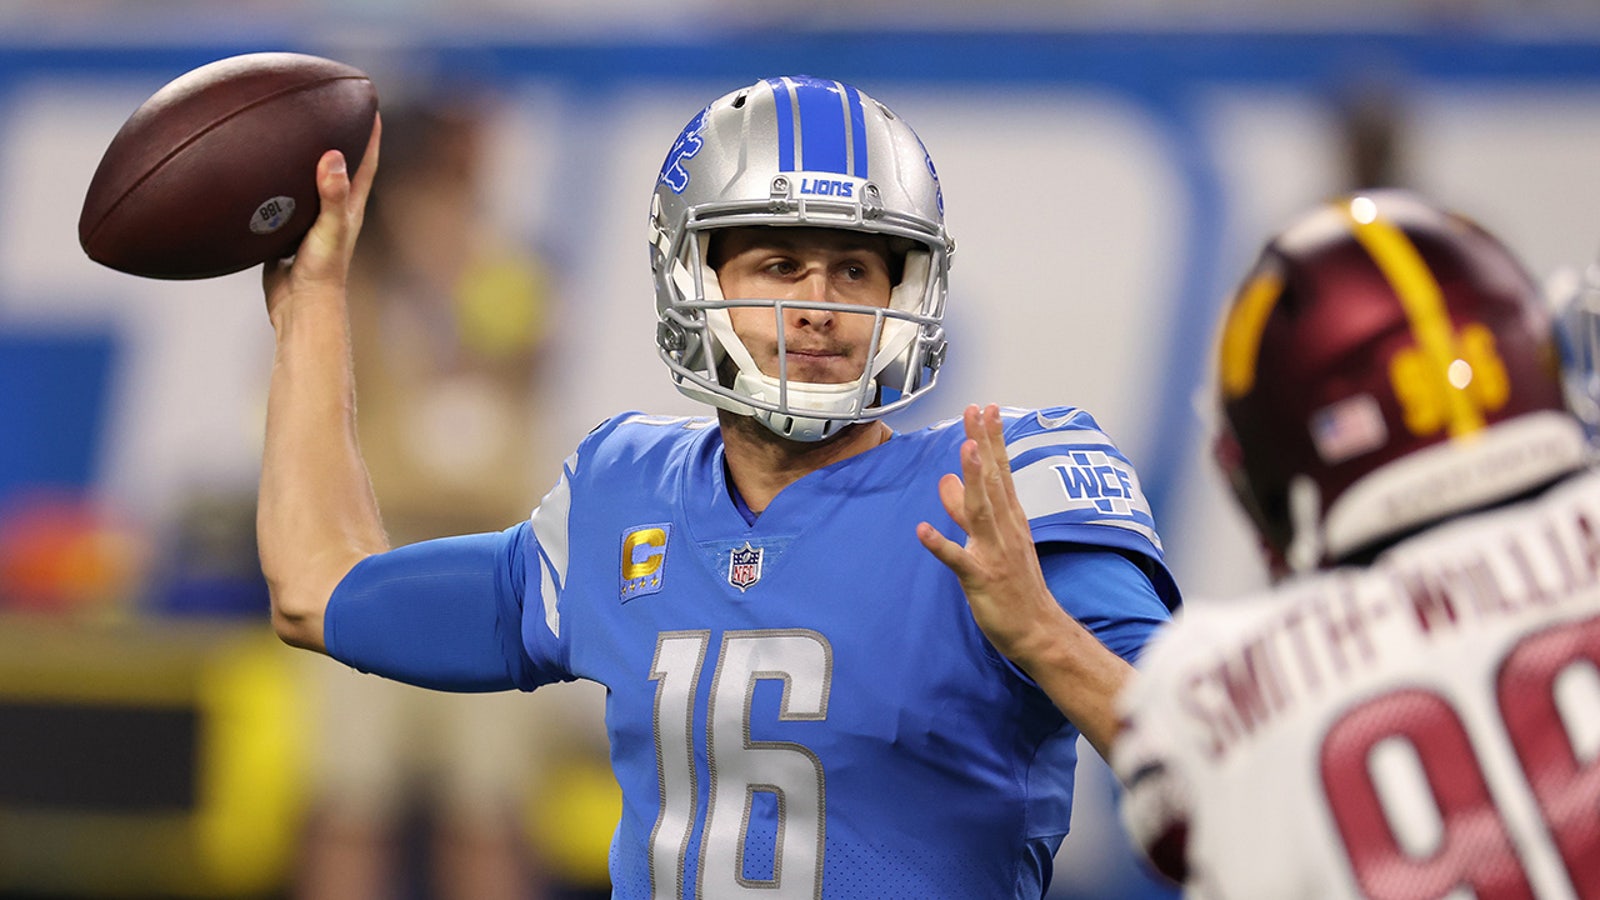 Jared Goff throws for four touchdowns and over 250-yards in Lions 36-27 victory